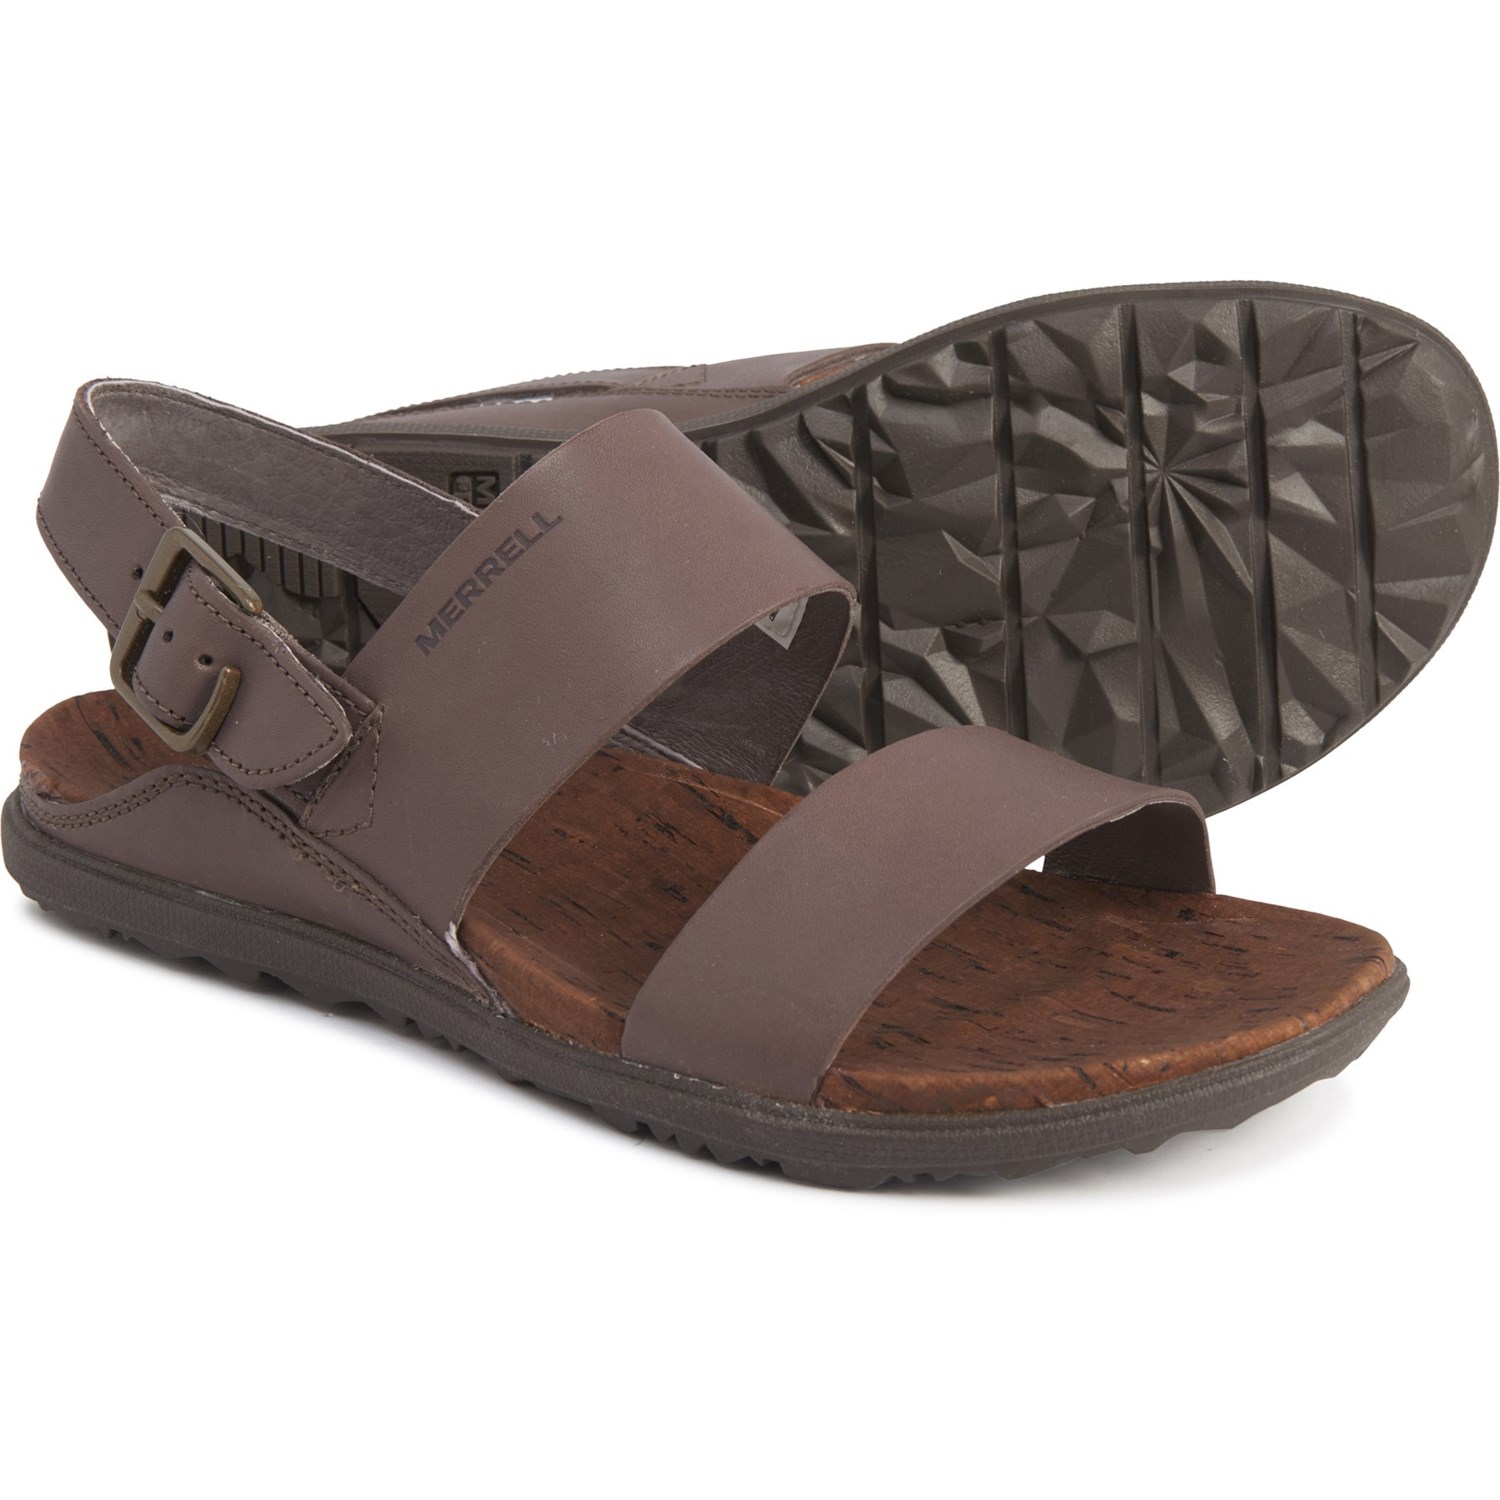 merrell about town sandals